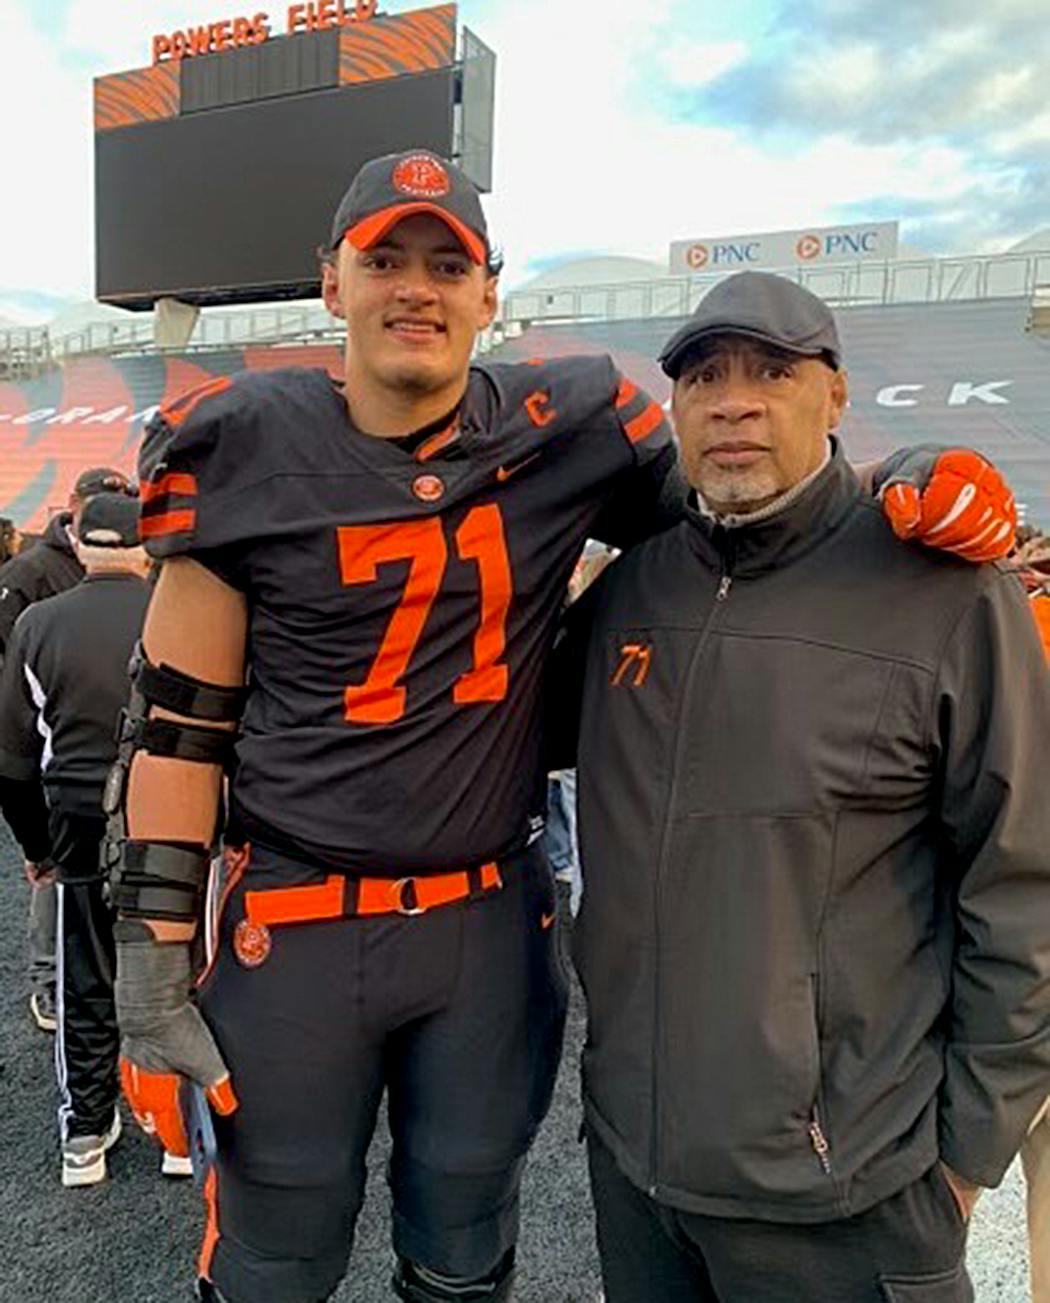 Jalen Travis of Princeton football with his dad, Nate.